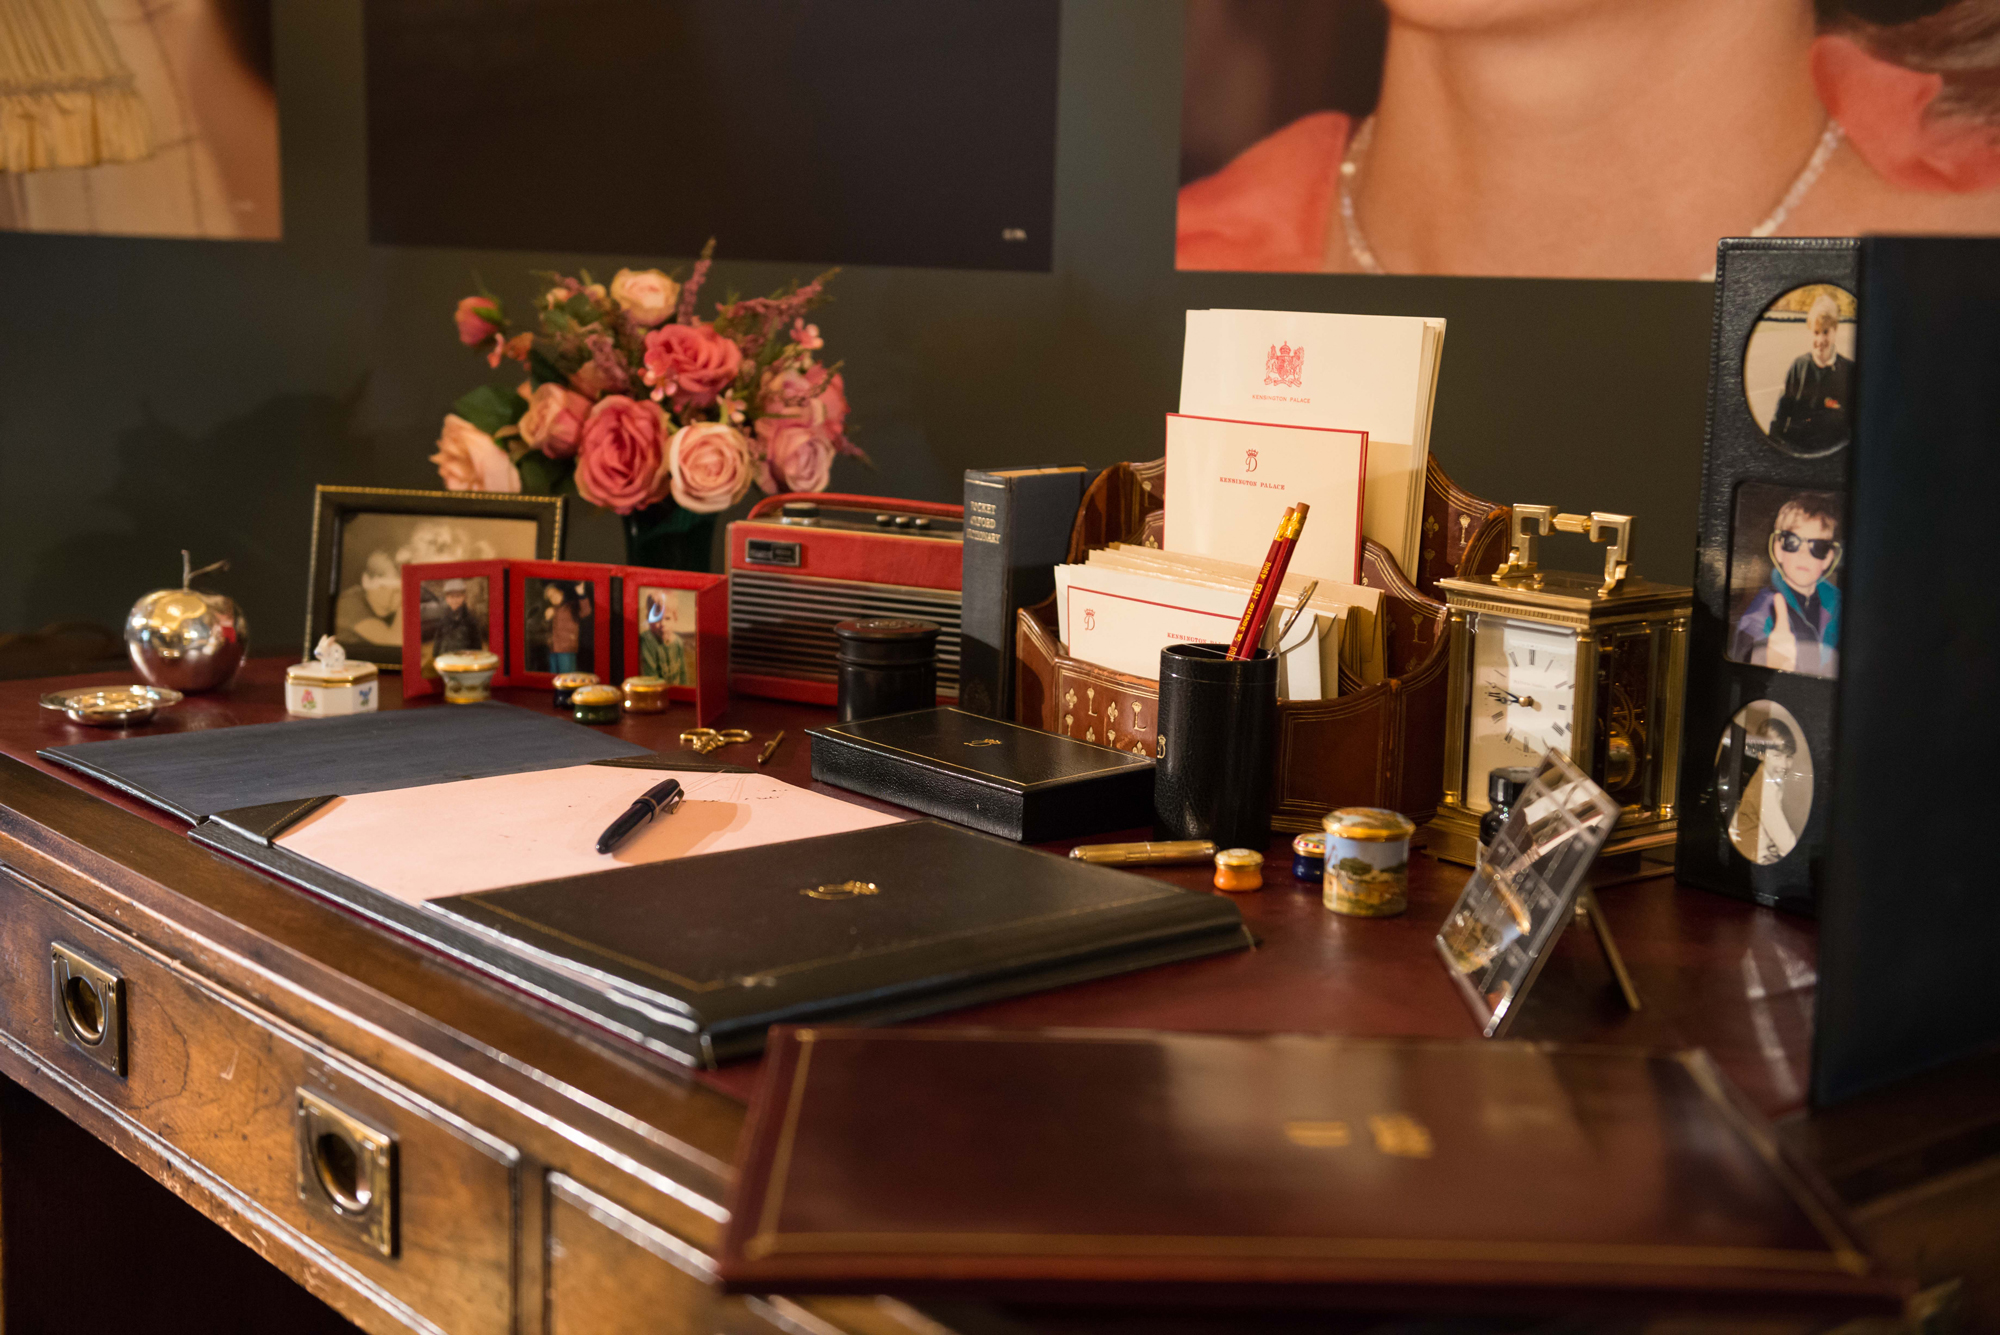 PHOTO: Princess Diana's desk, where she worked in her sitting room, at Kensington Palace is on display, in London.